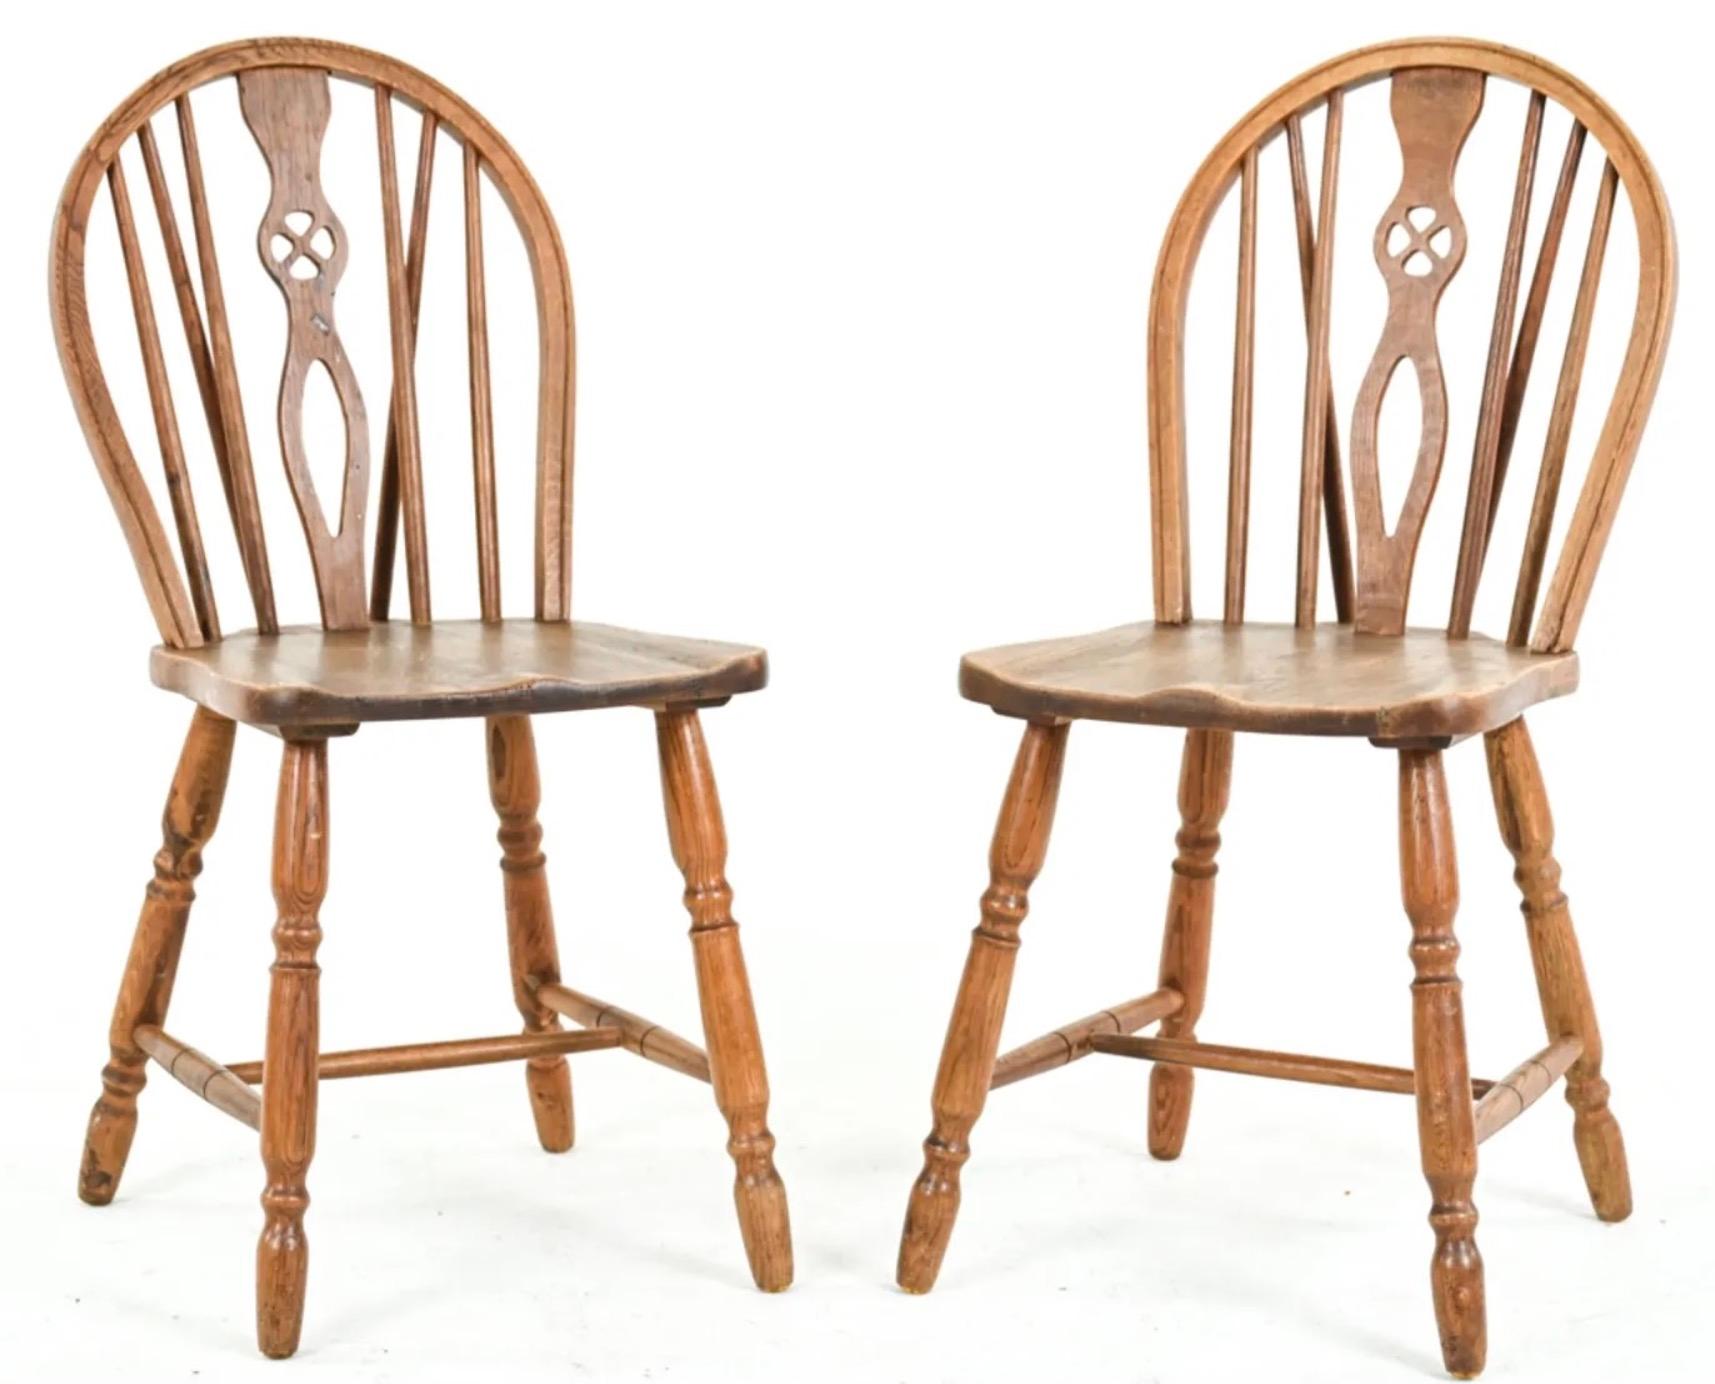 Beautifully hand carved set of low back Windsor style dining side chairs made from yew wood, pierced splat backs and well figured seats raised on turned legs united by simple stretchers.
Windsor chairs, in general, in varying sizes, shapes, forms